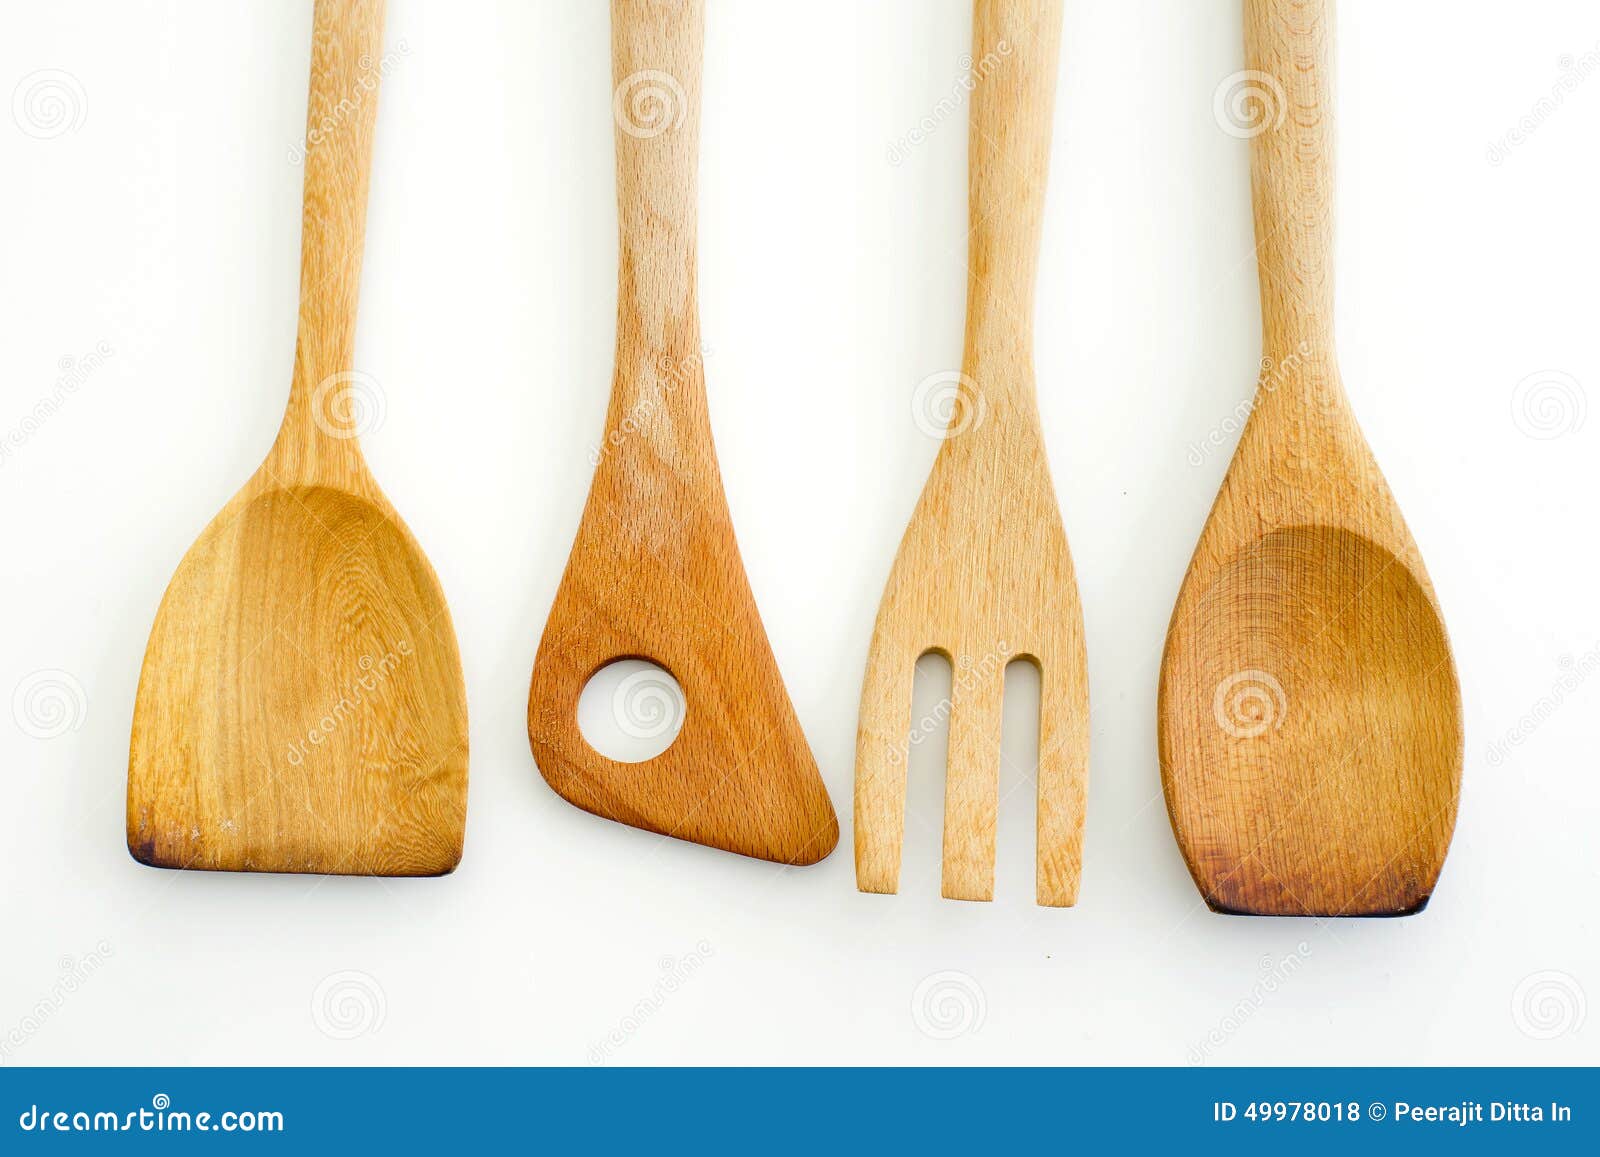 A collection of wooden kitchen utensils isolated on white color background